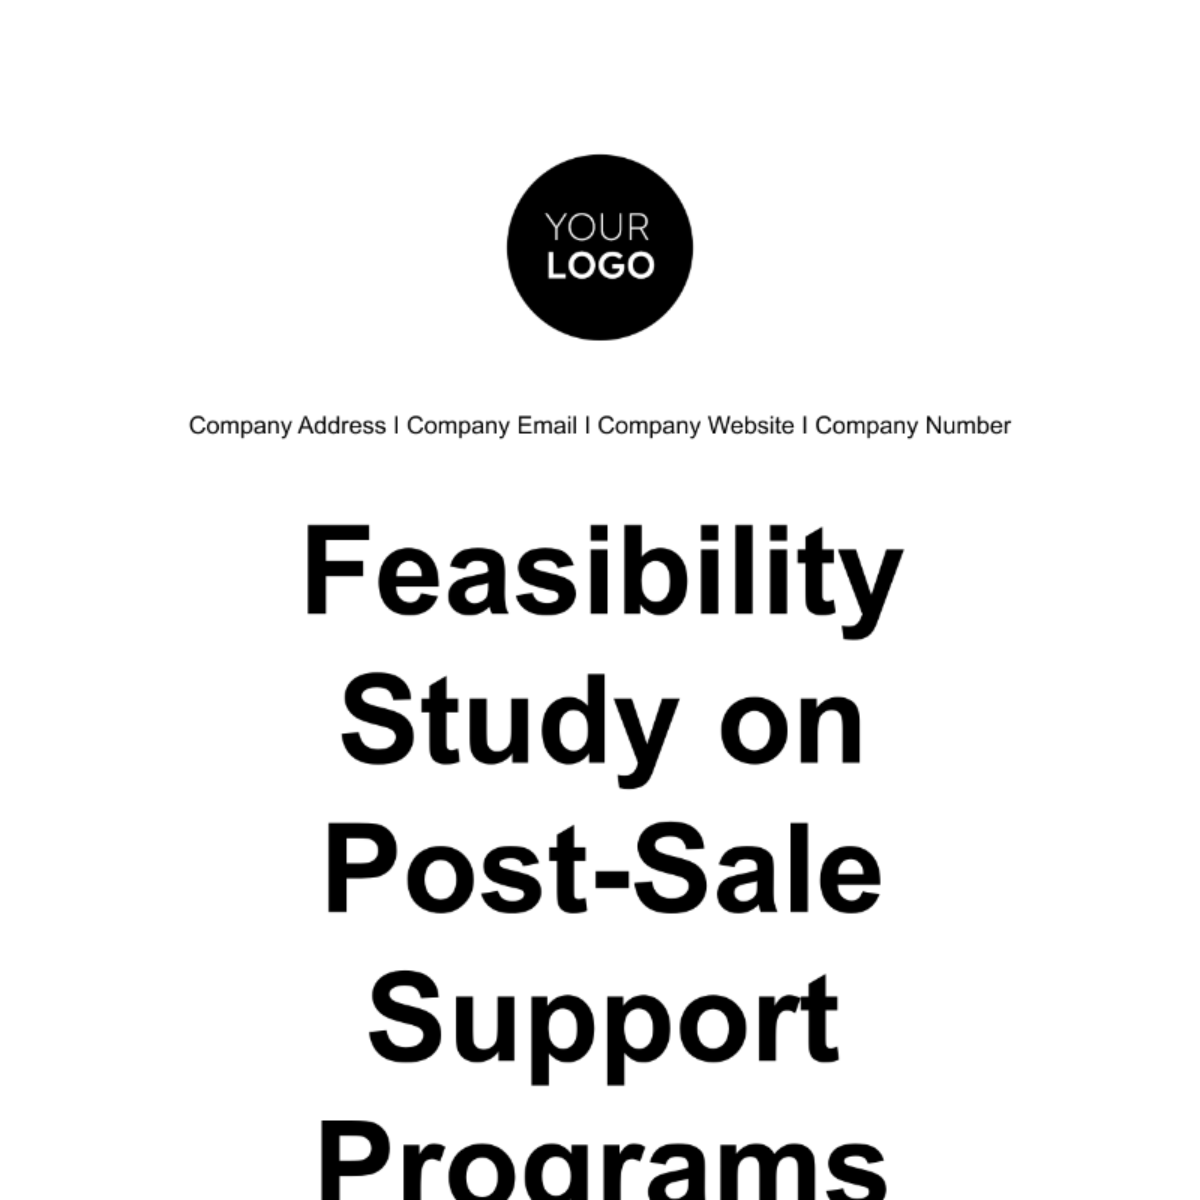 Feasibility Study on Post-Sale Support Programs Template